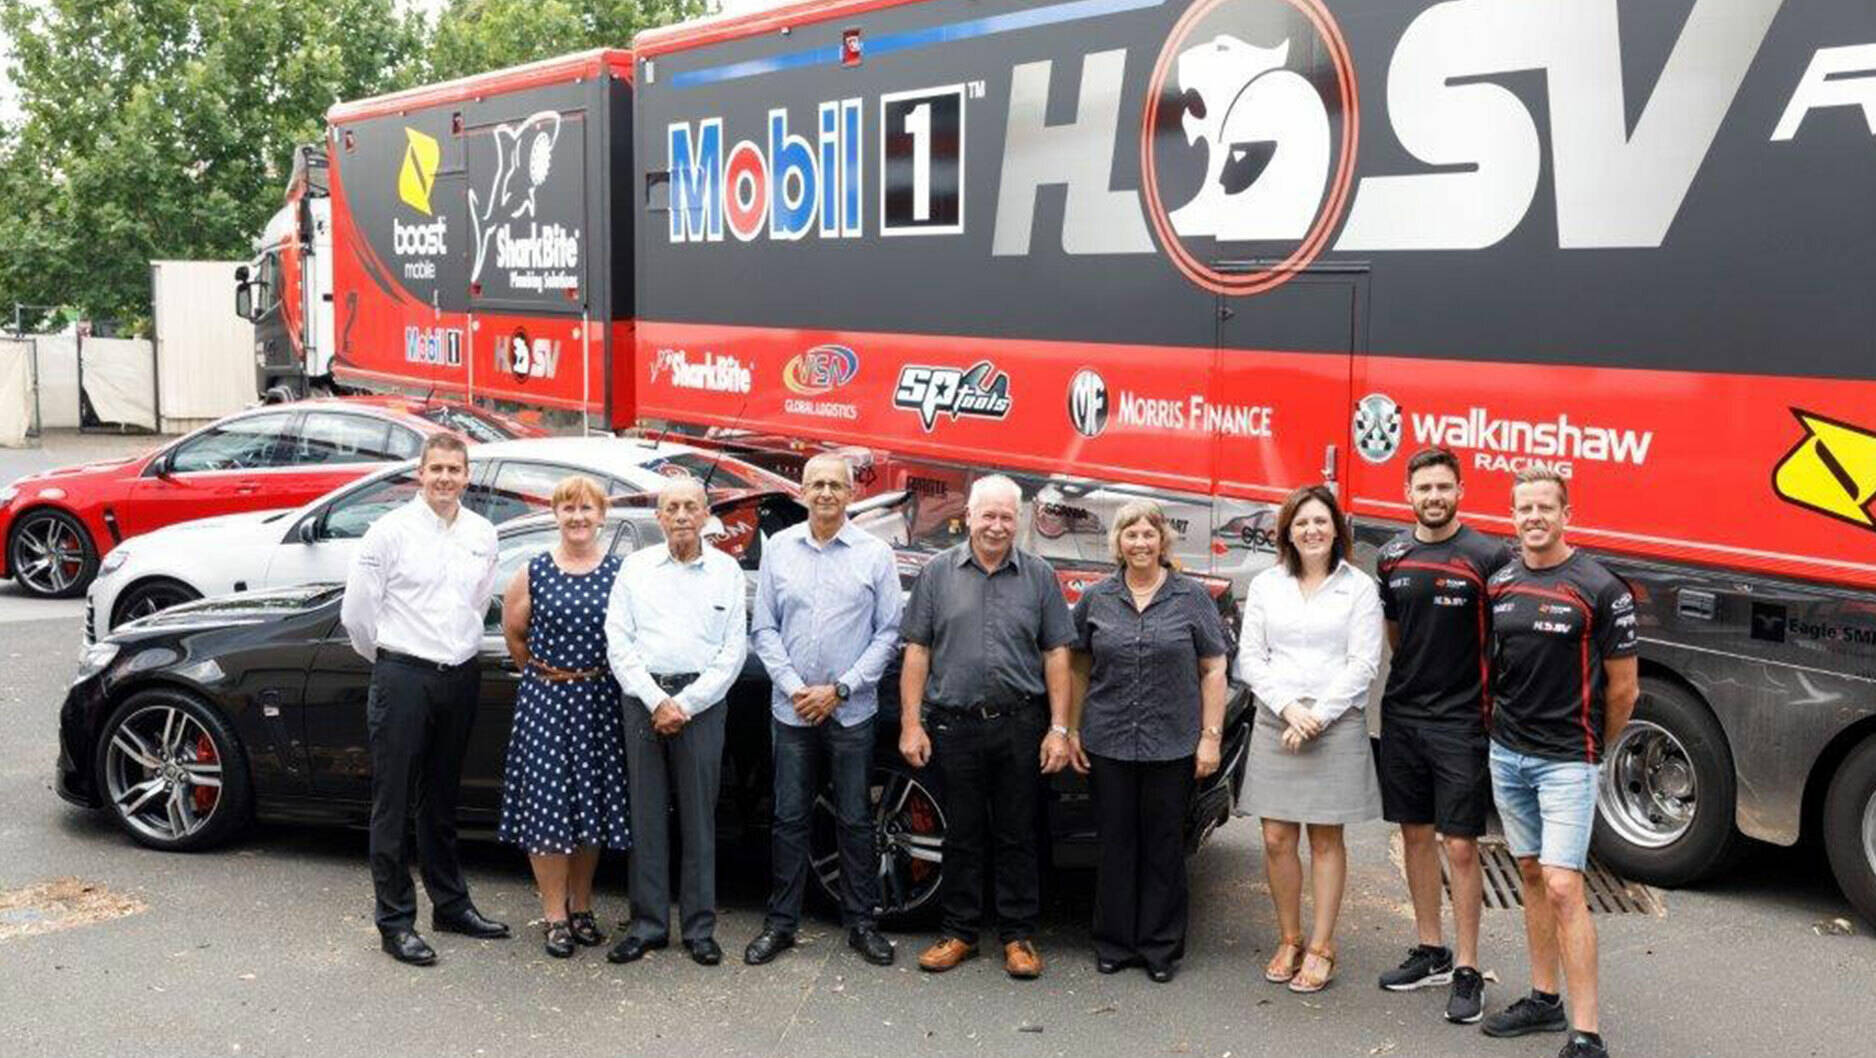 Image Photo—Ask for Mobilgrand prize winners Steve Williams and Neville Roesler (centre) are joined by ExxonMobil's Colin Smith and Christie Torwick EM and Mobil 1 HSV drivers Scott Pye and James Courtney.